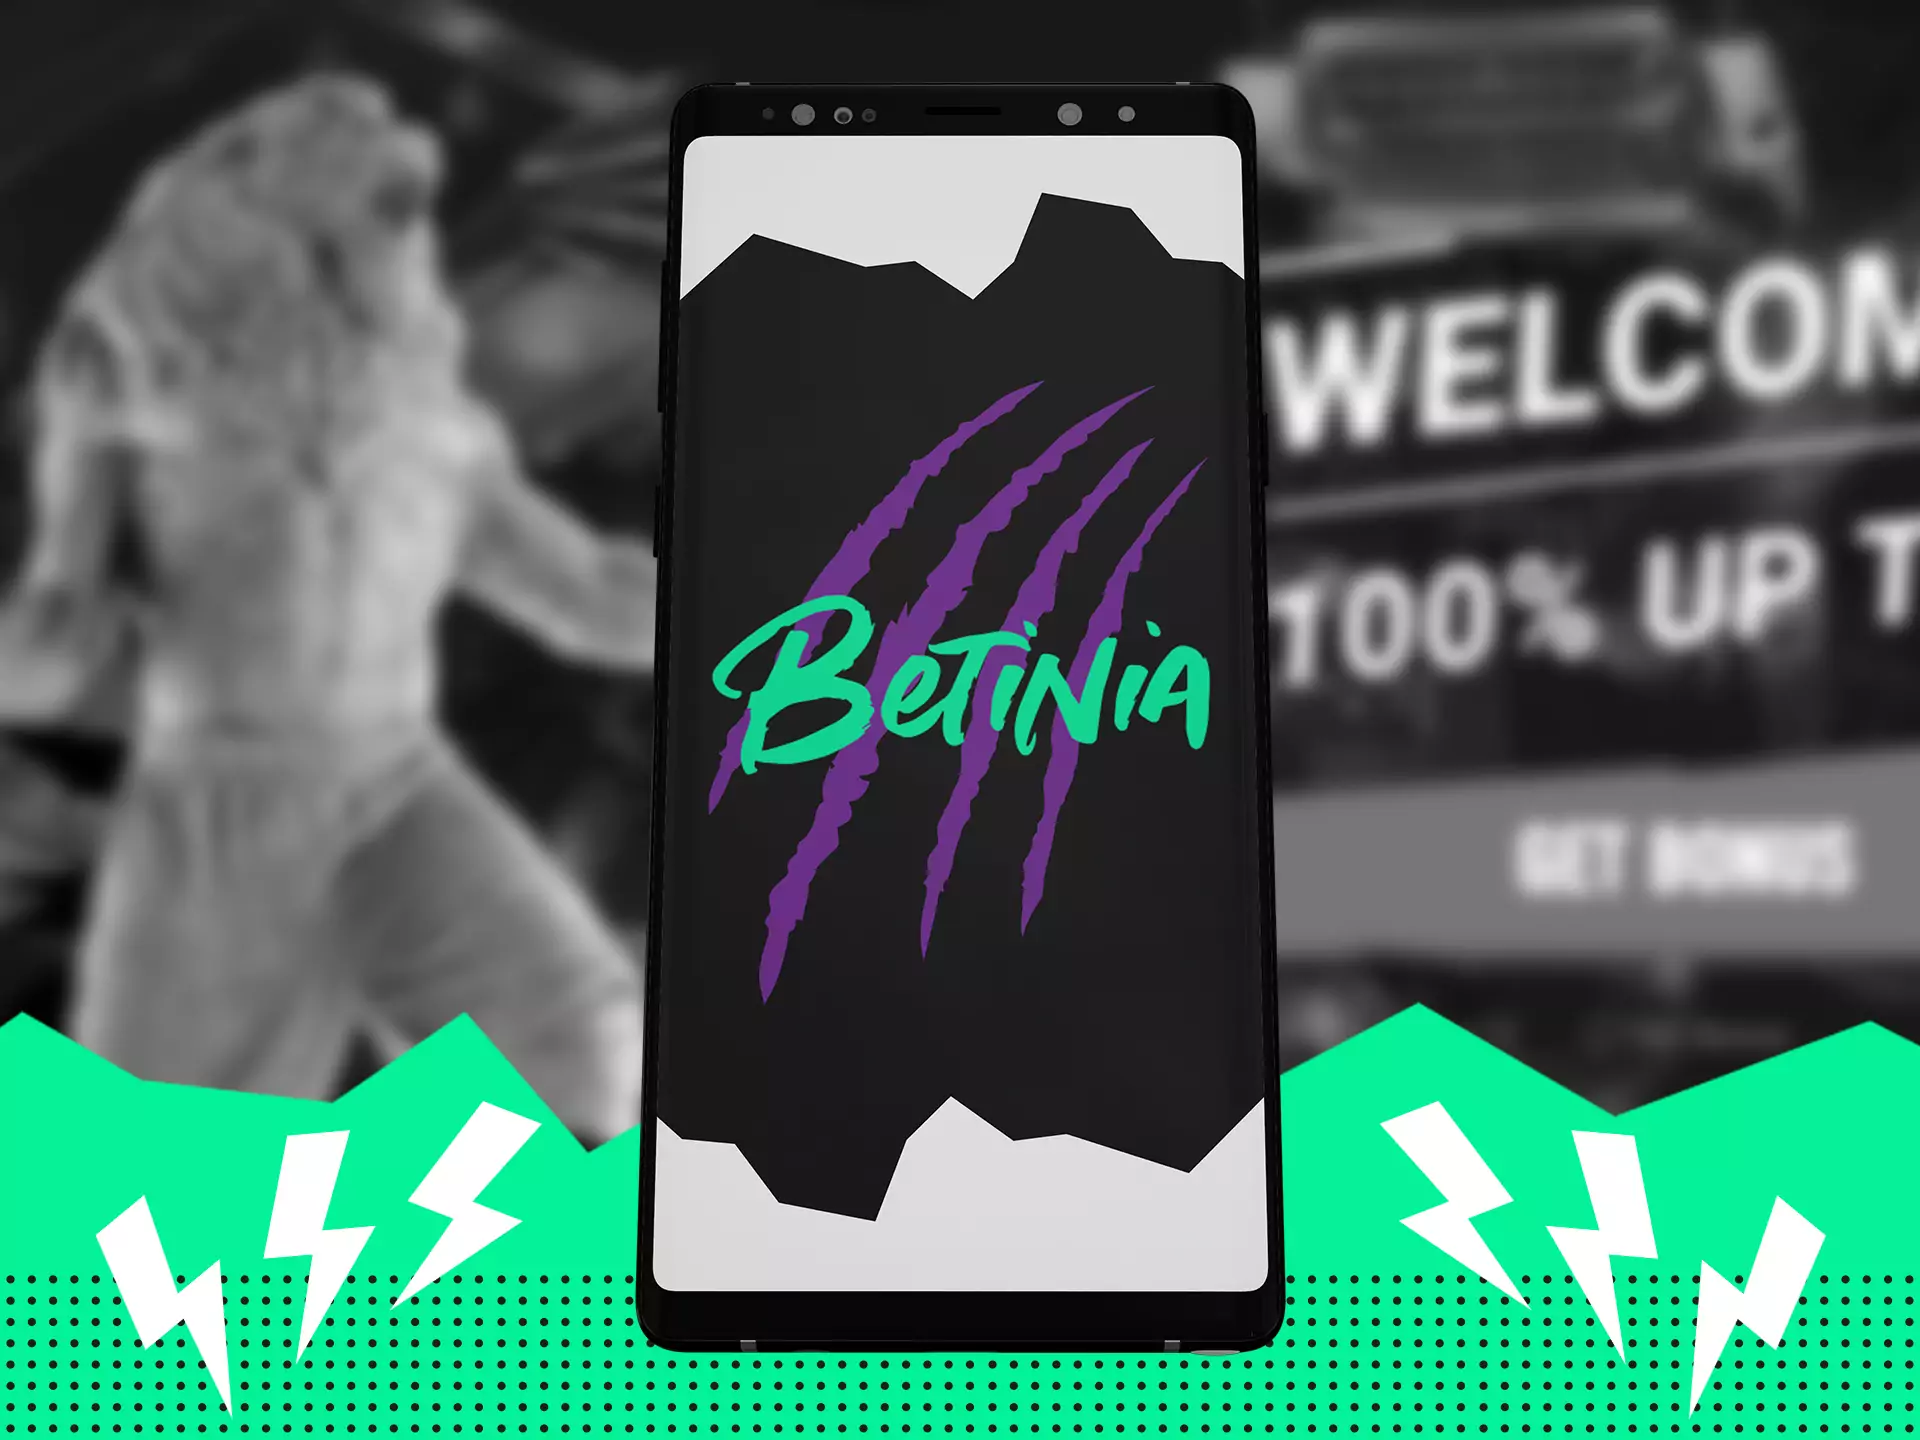 Learn more about the quirks and features of the Betinia app.